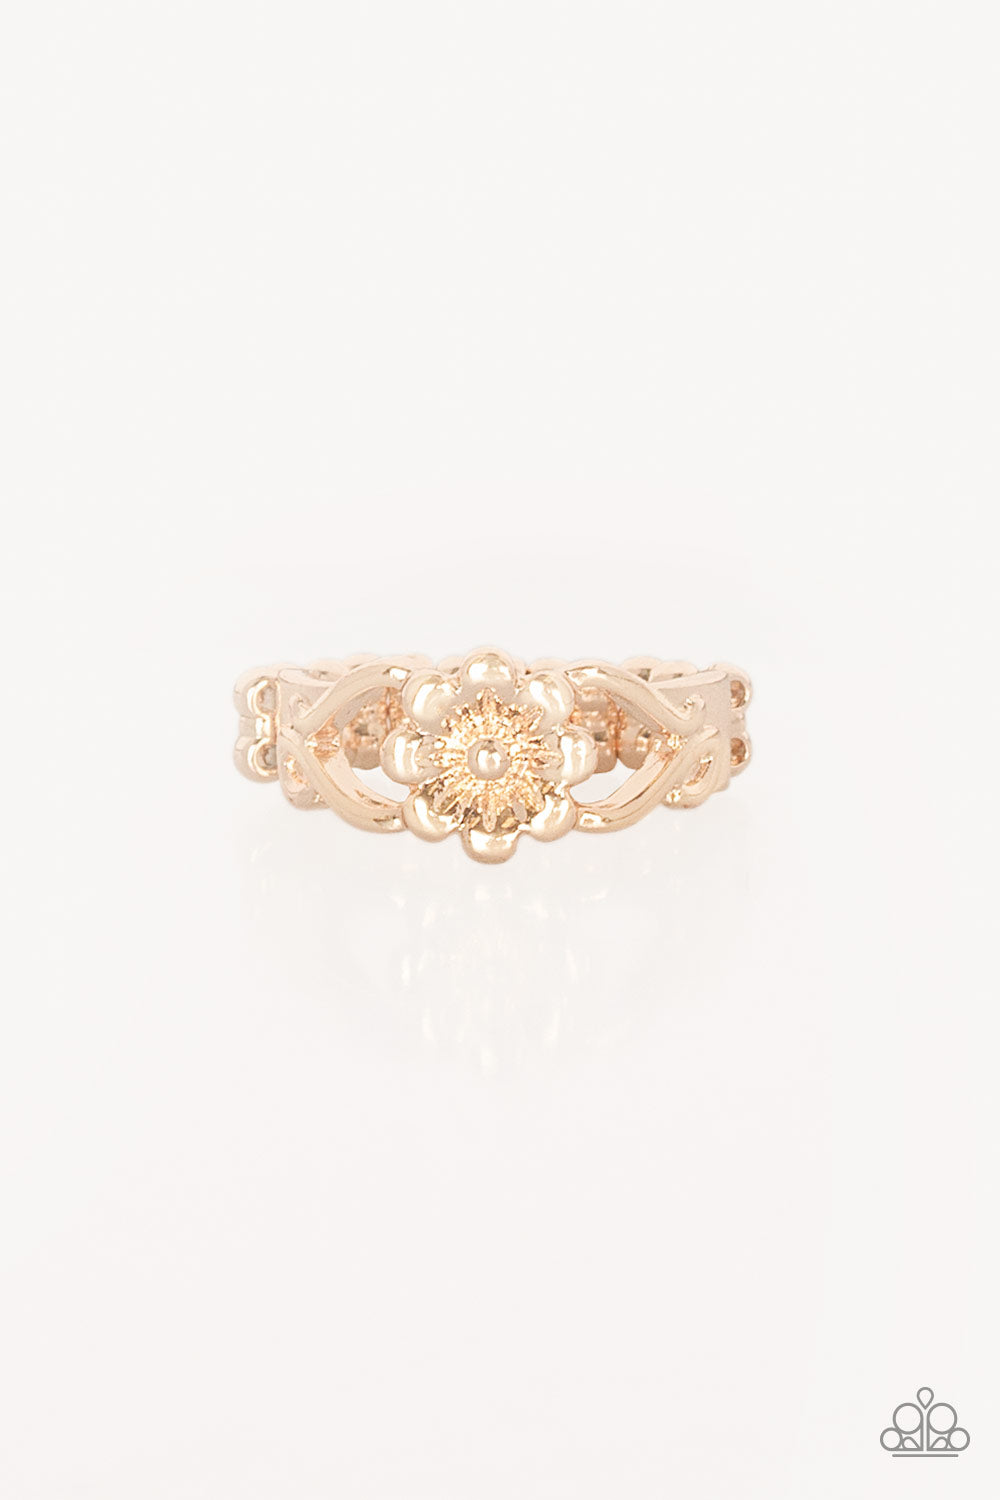 Paparazzi Accessories Galapagos Gardens - Rose Gold Ring 